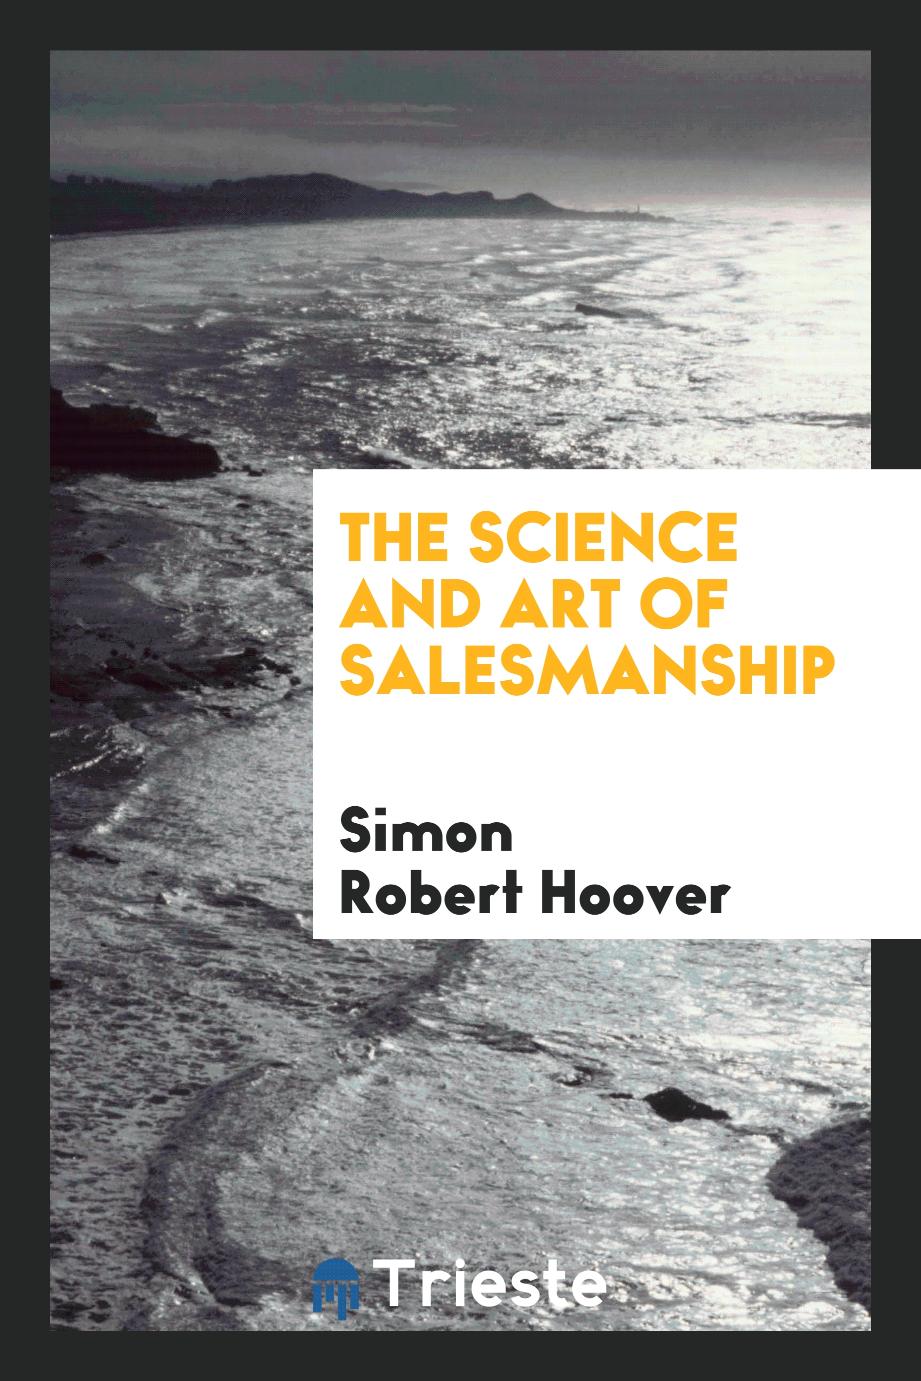 The science and art of salesmanship